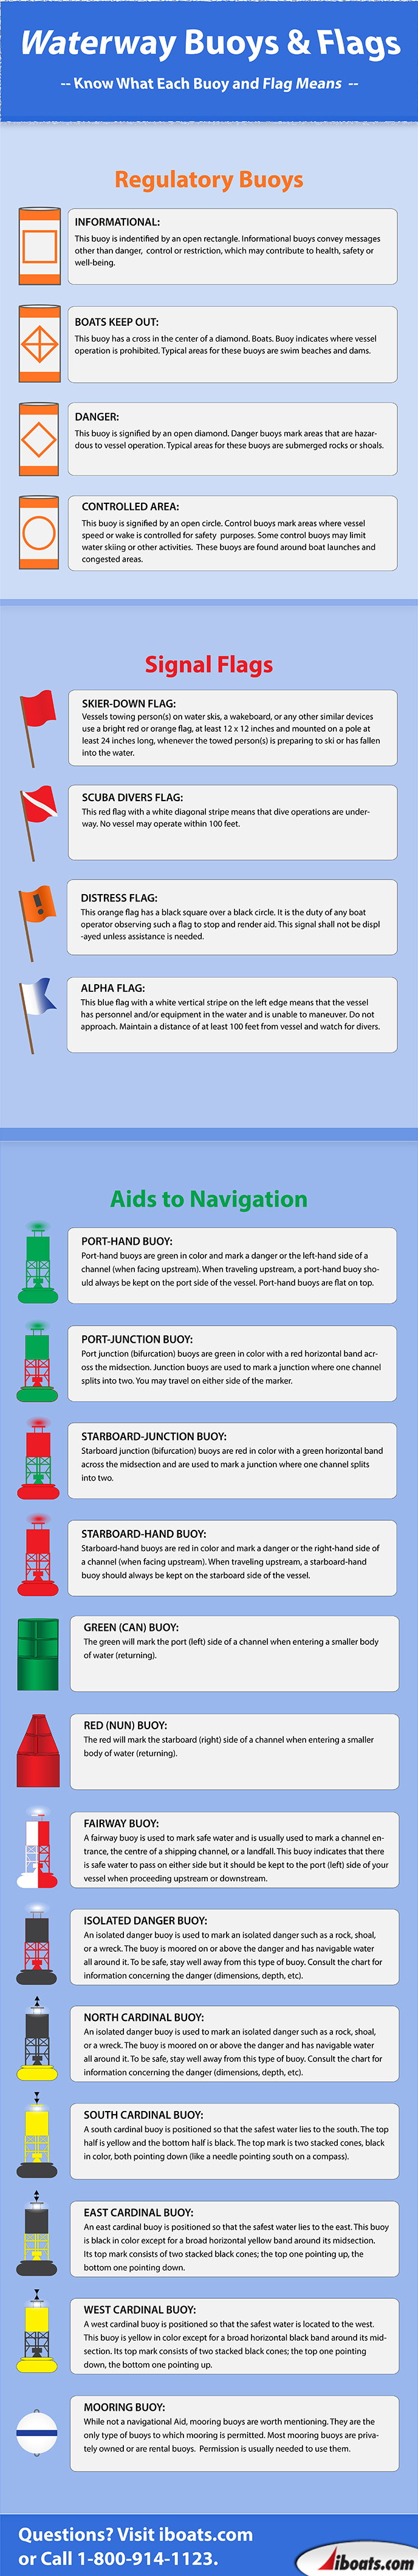 Infographic on Boating Navigational Buoys and Markers